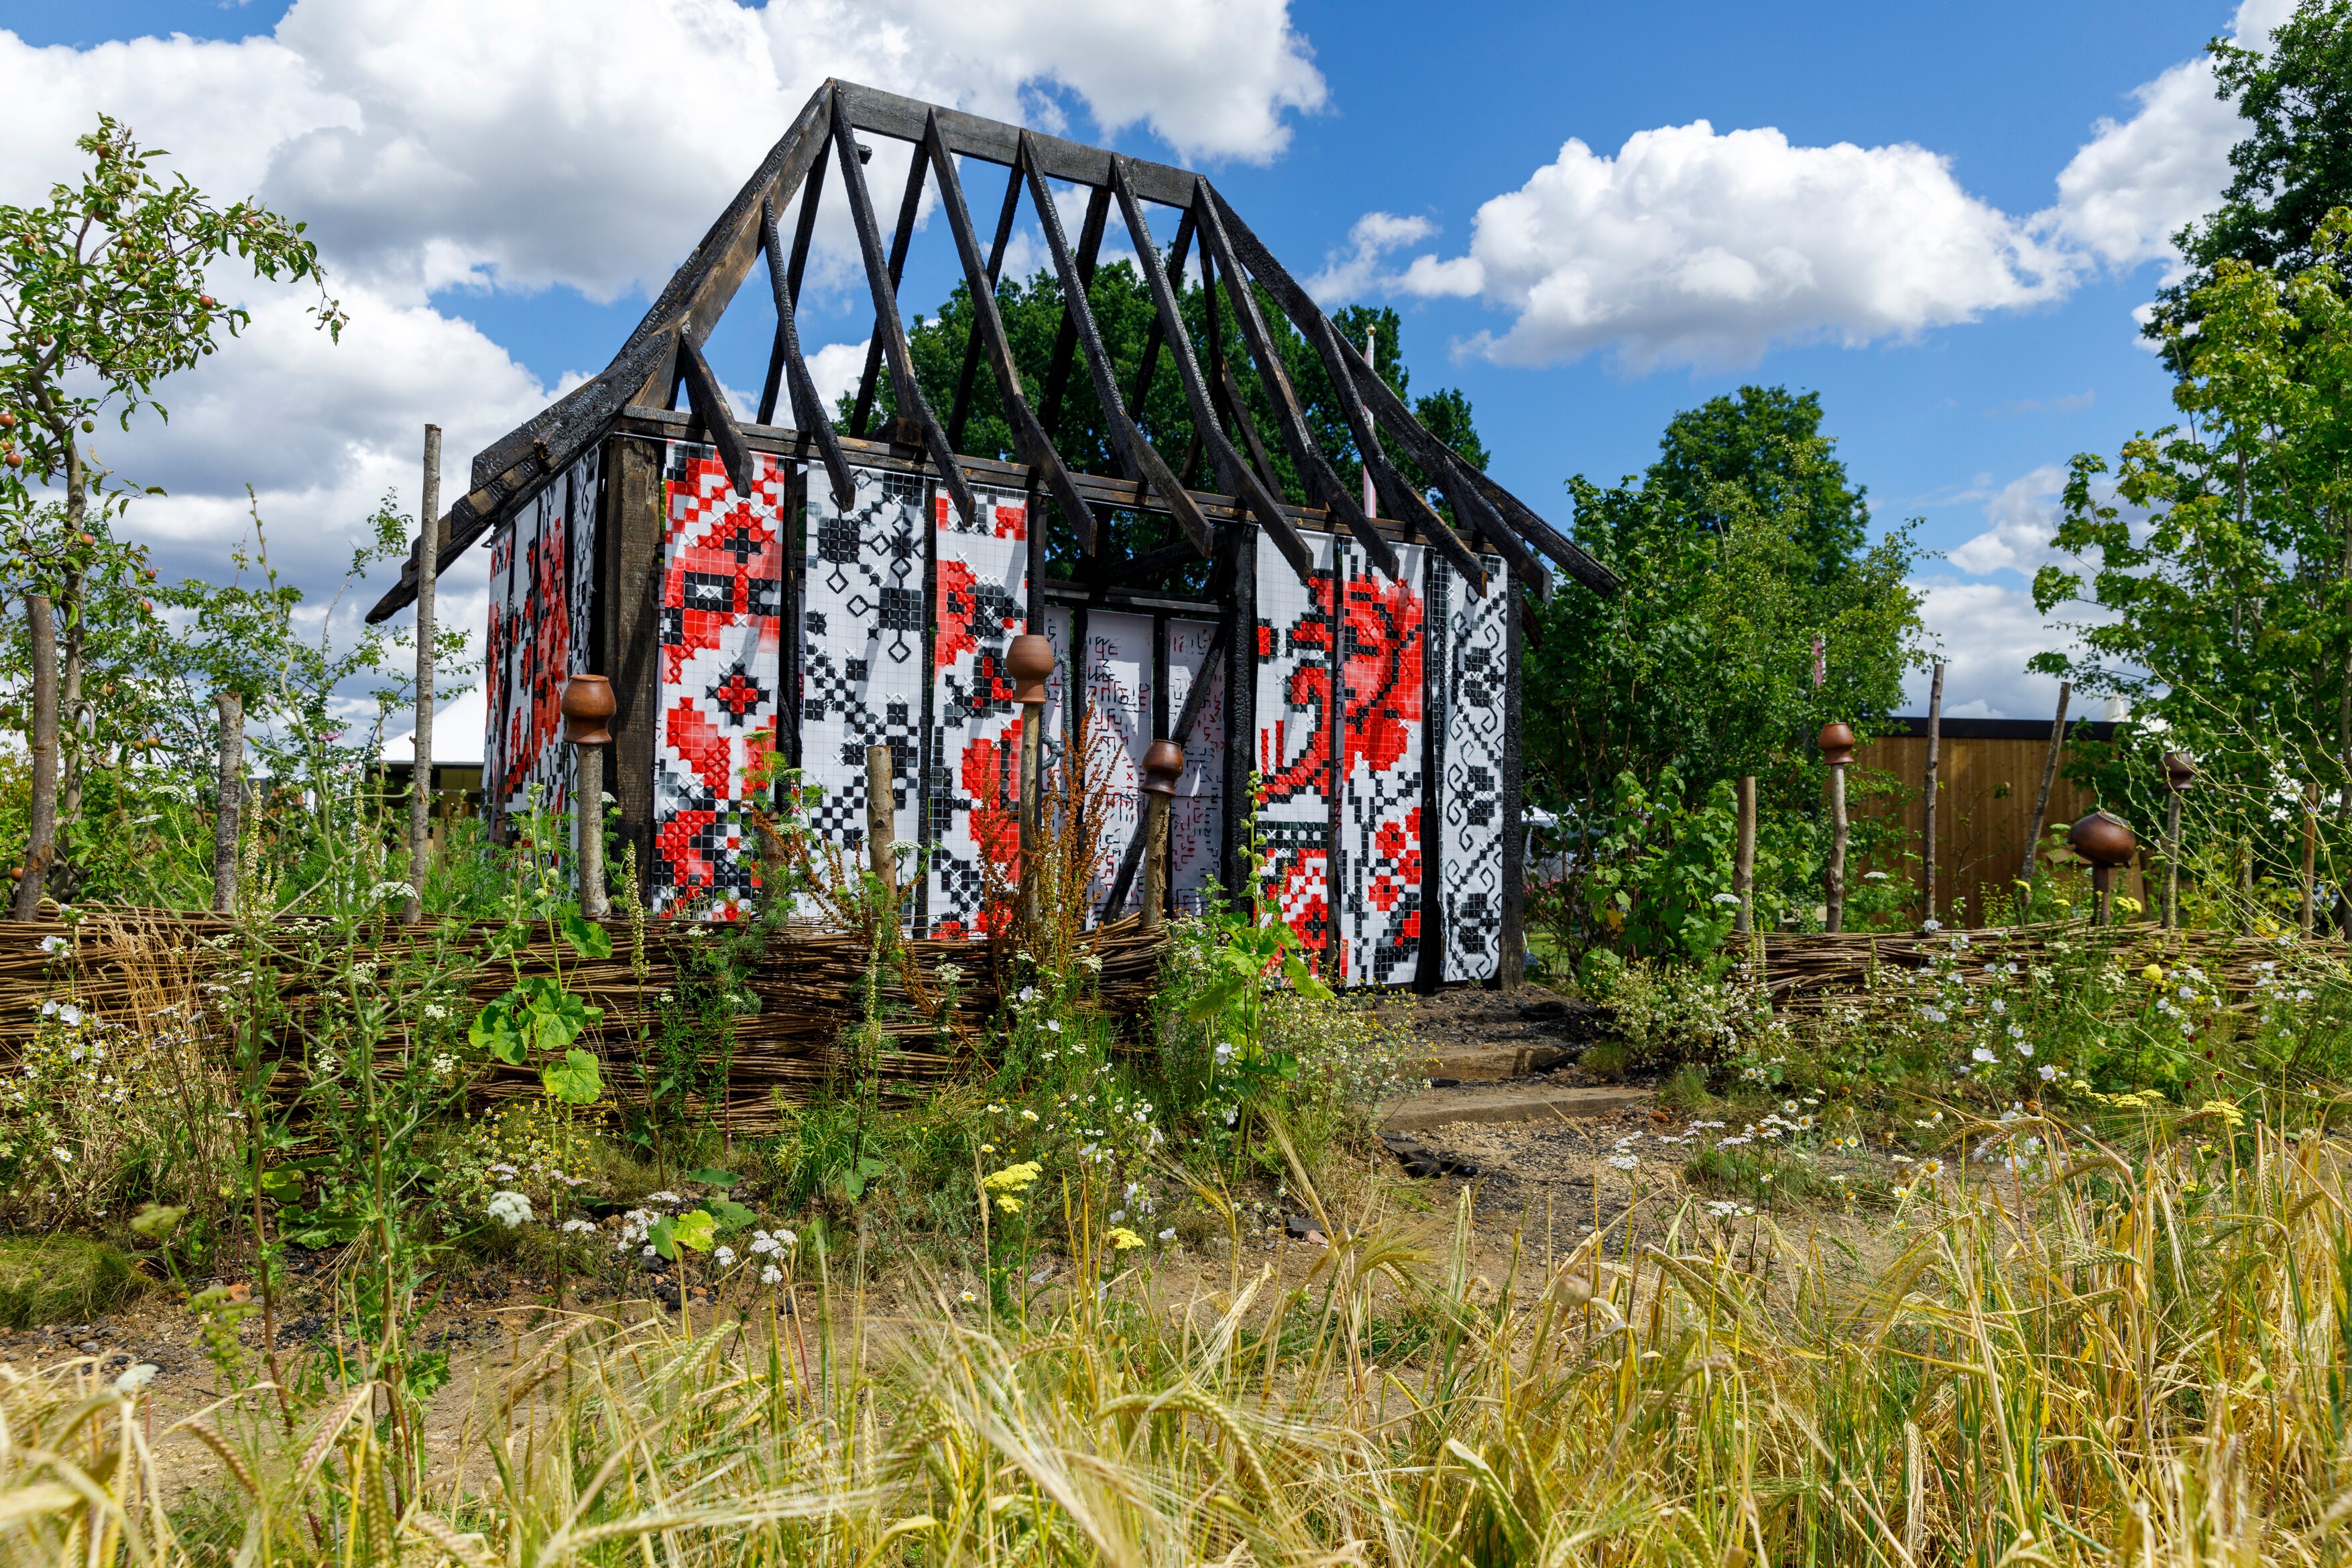 A burnt out structure in the What Does Not Burn garden 